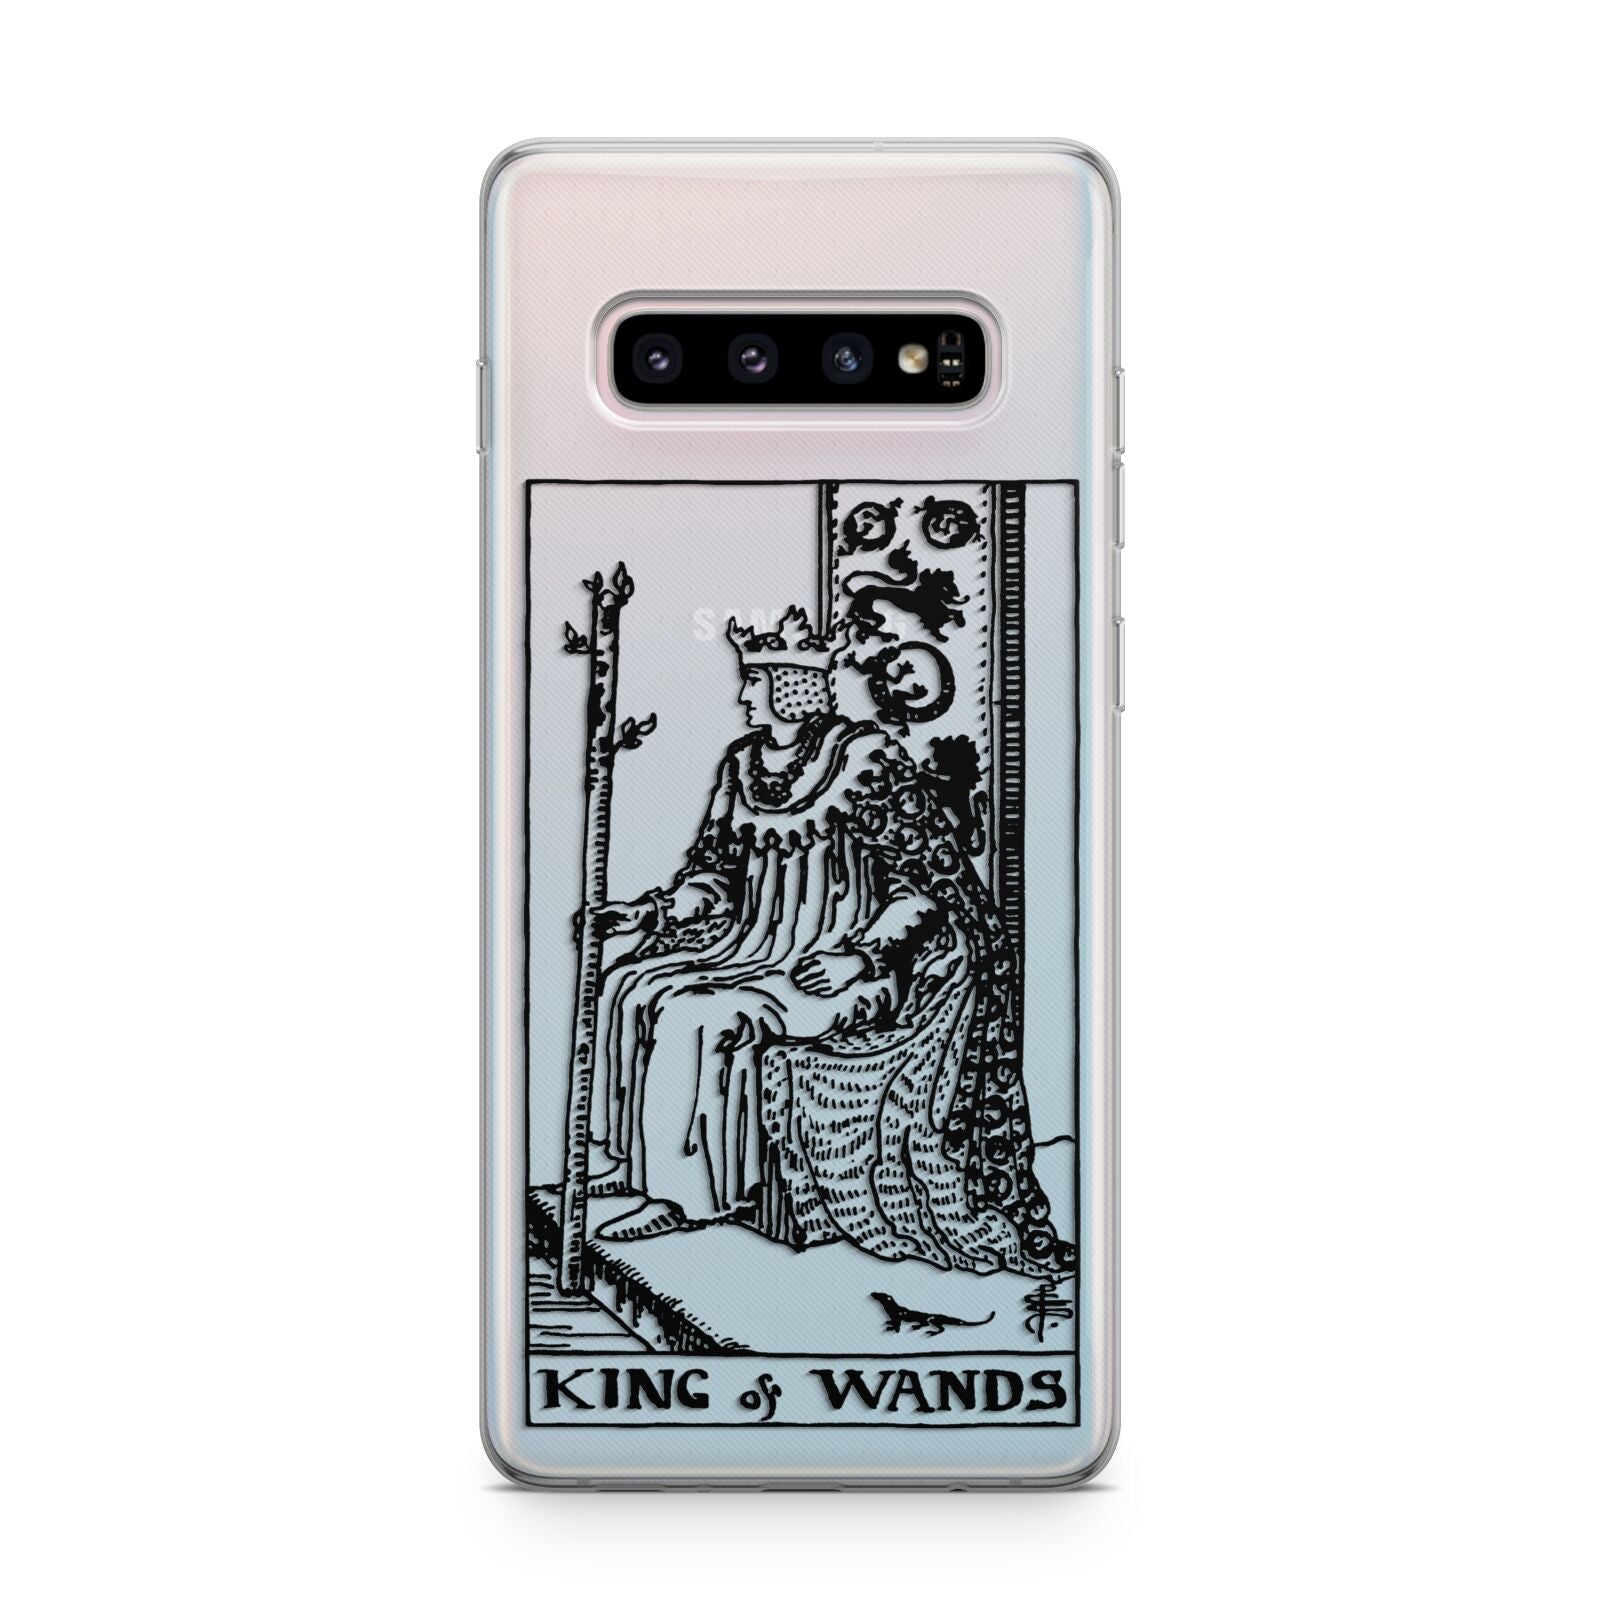 King of Wands Monochrome Samsung Galaxy S10 Plus Case